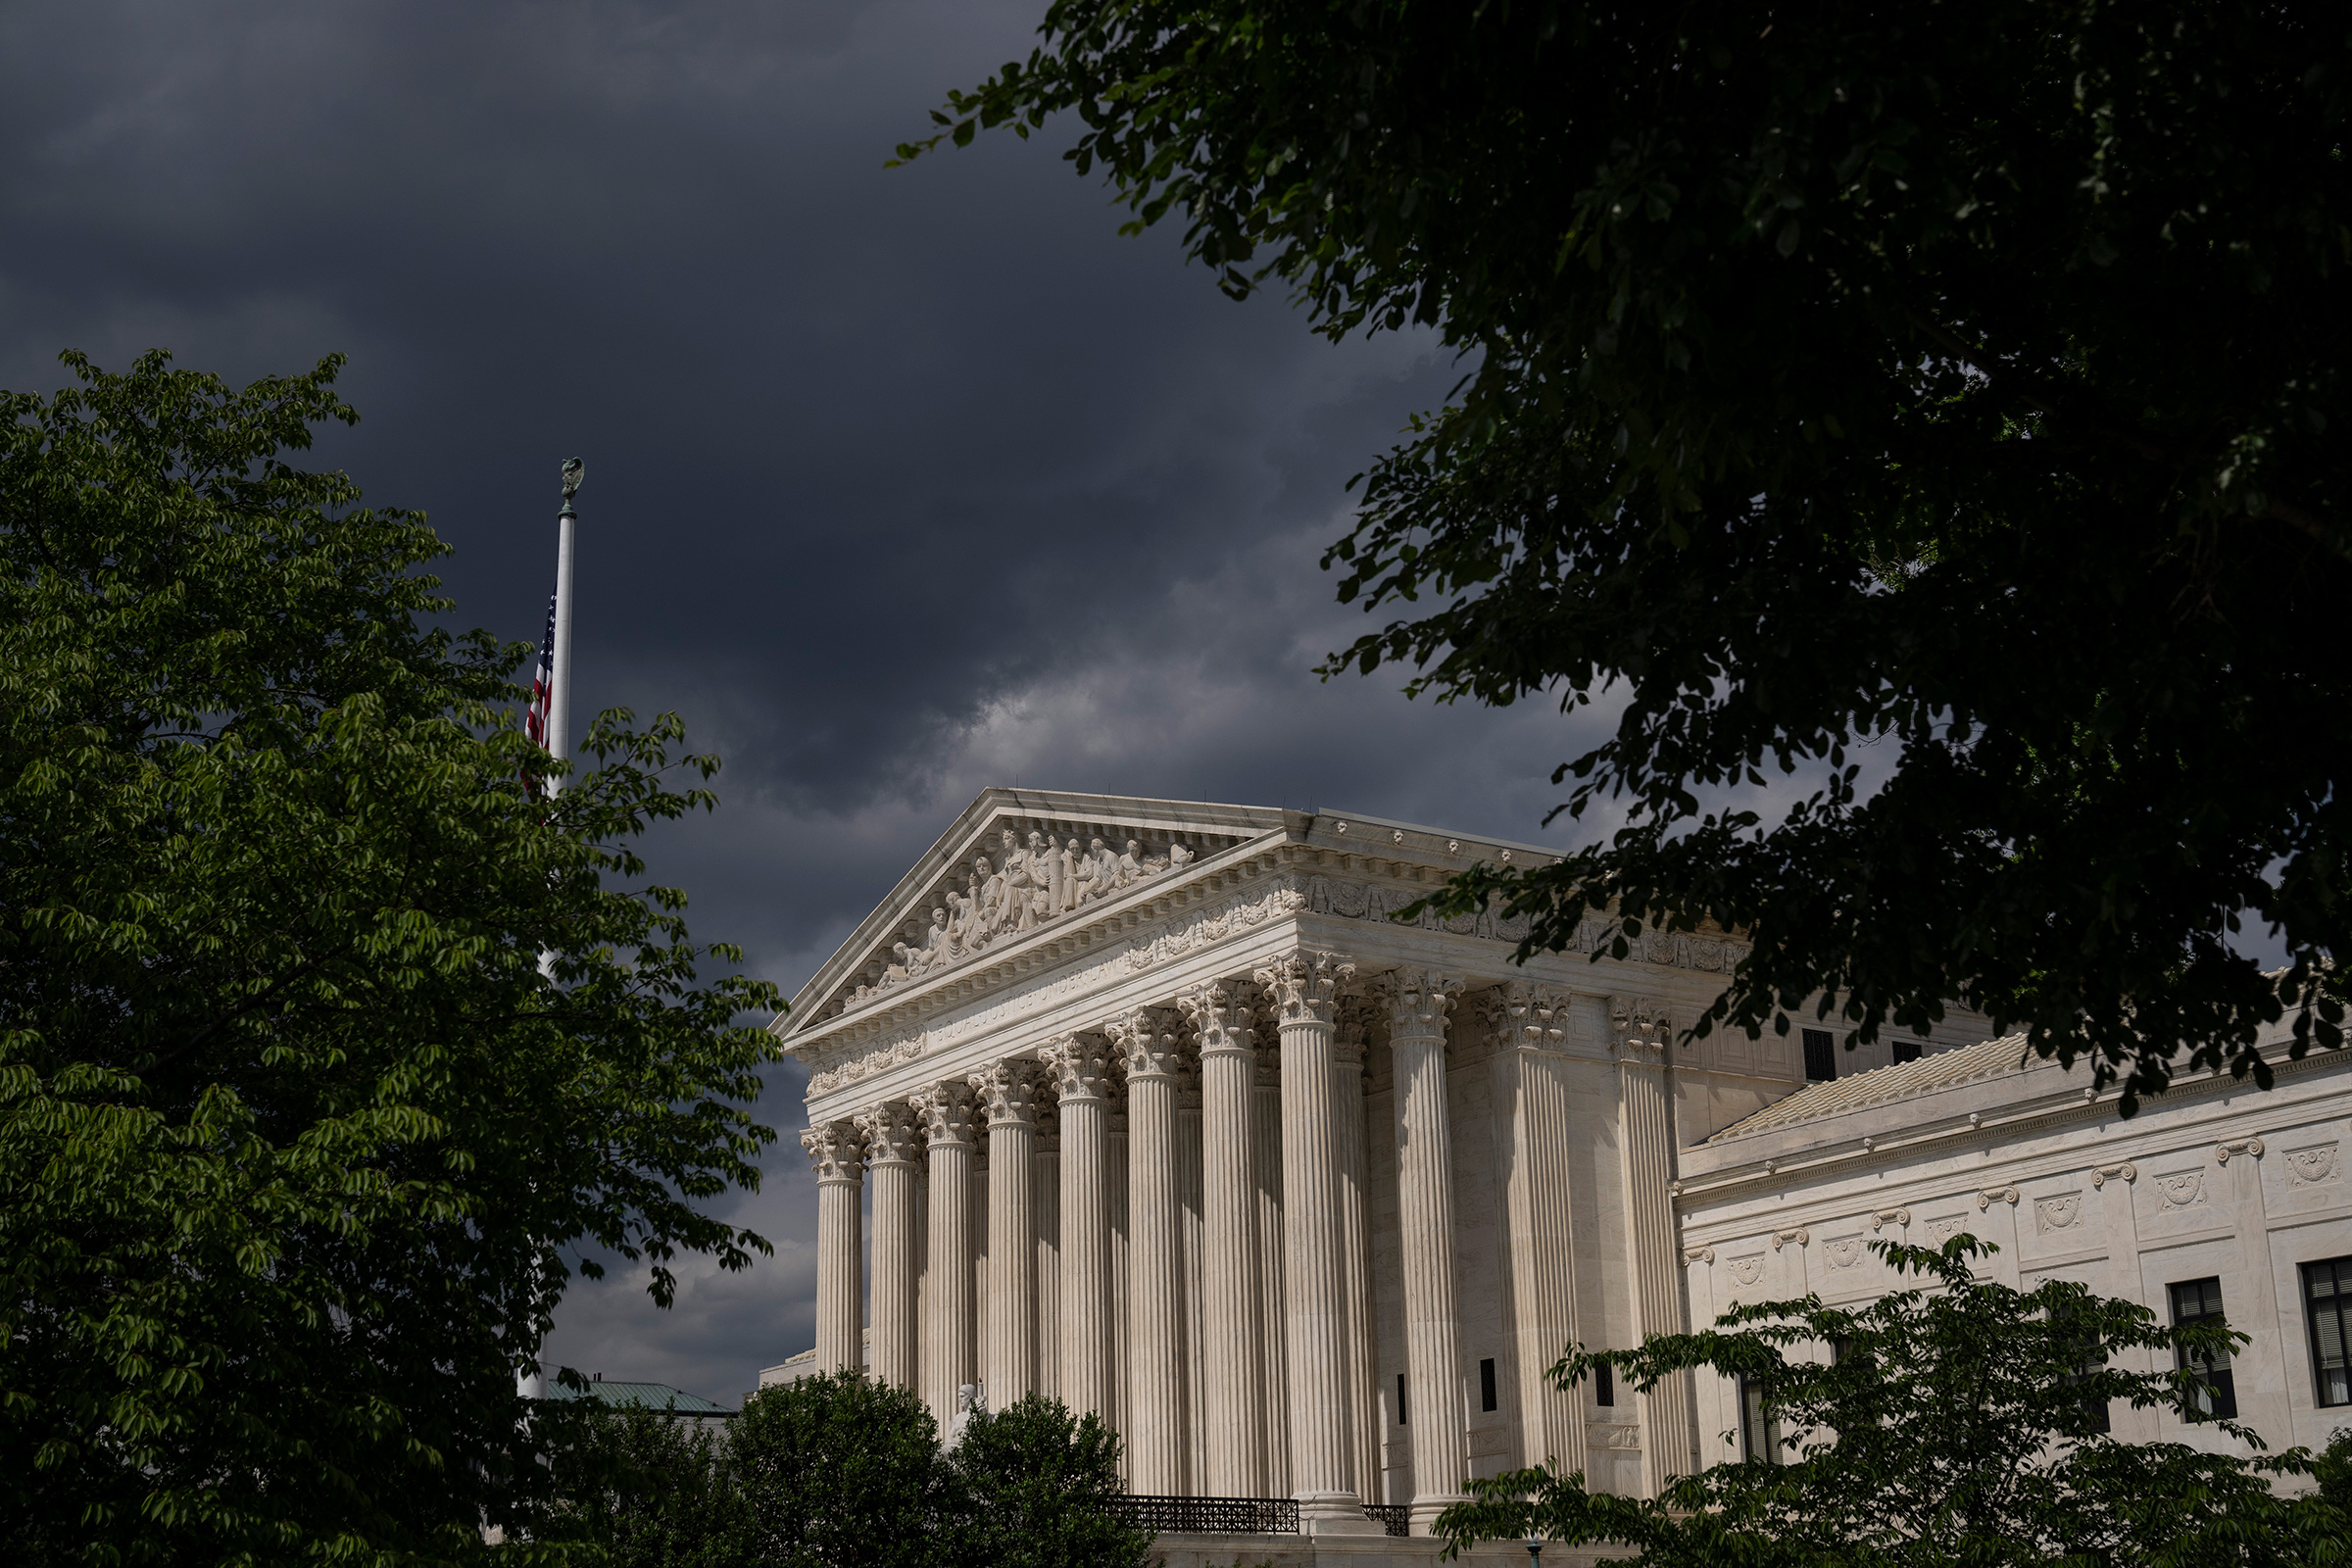 The U.S. Supreme Court building in Washington, D.C., on May 17, 2021.